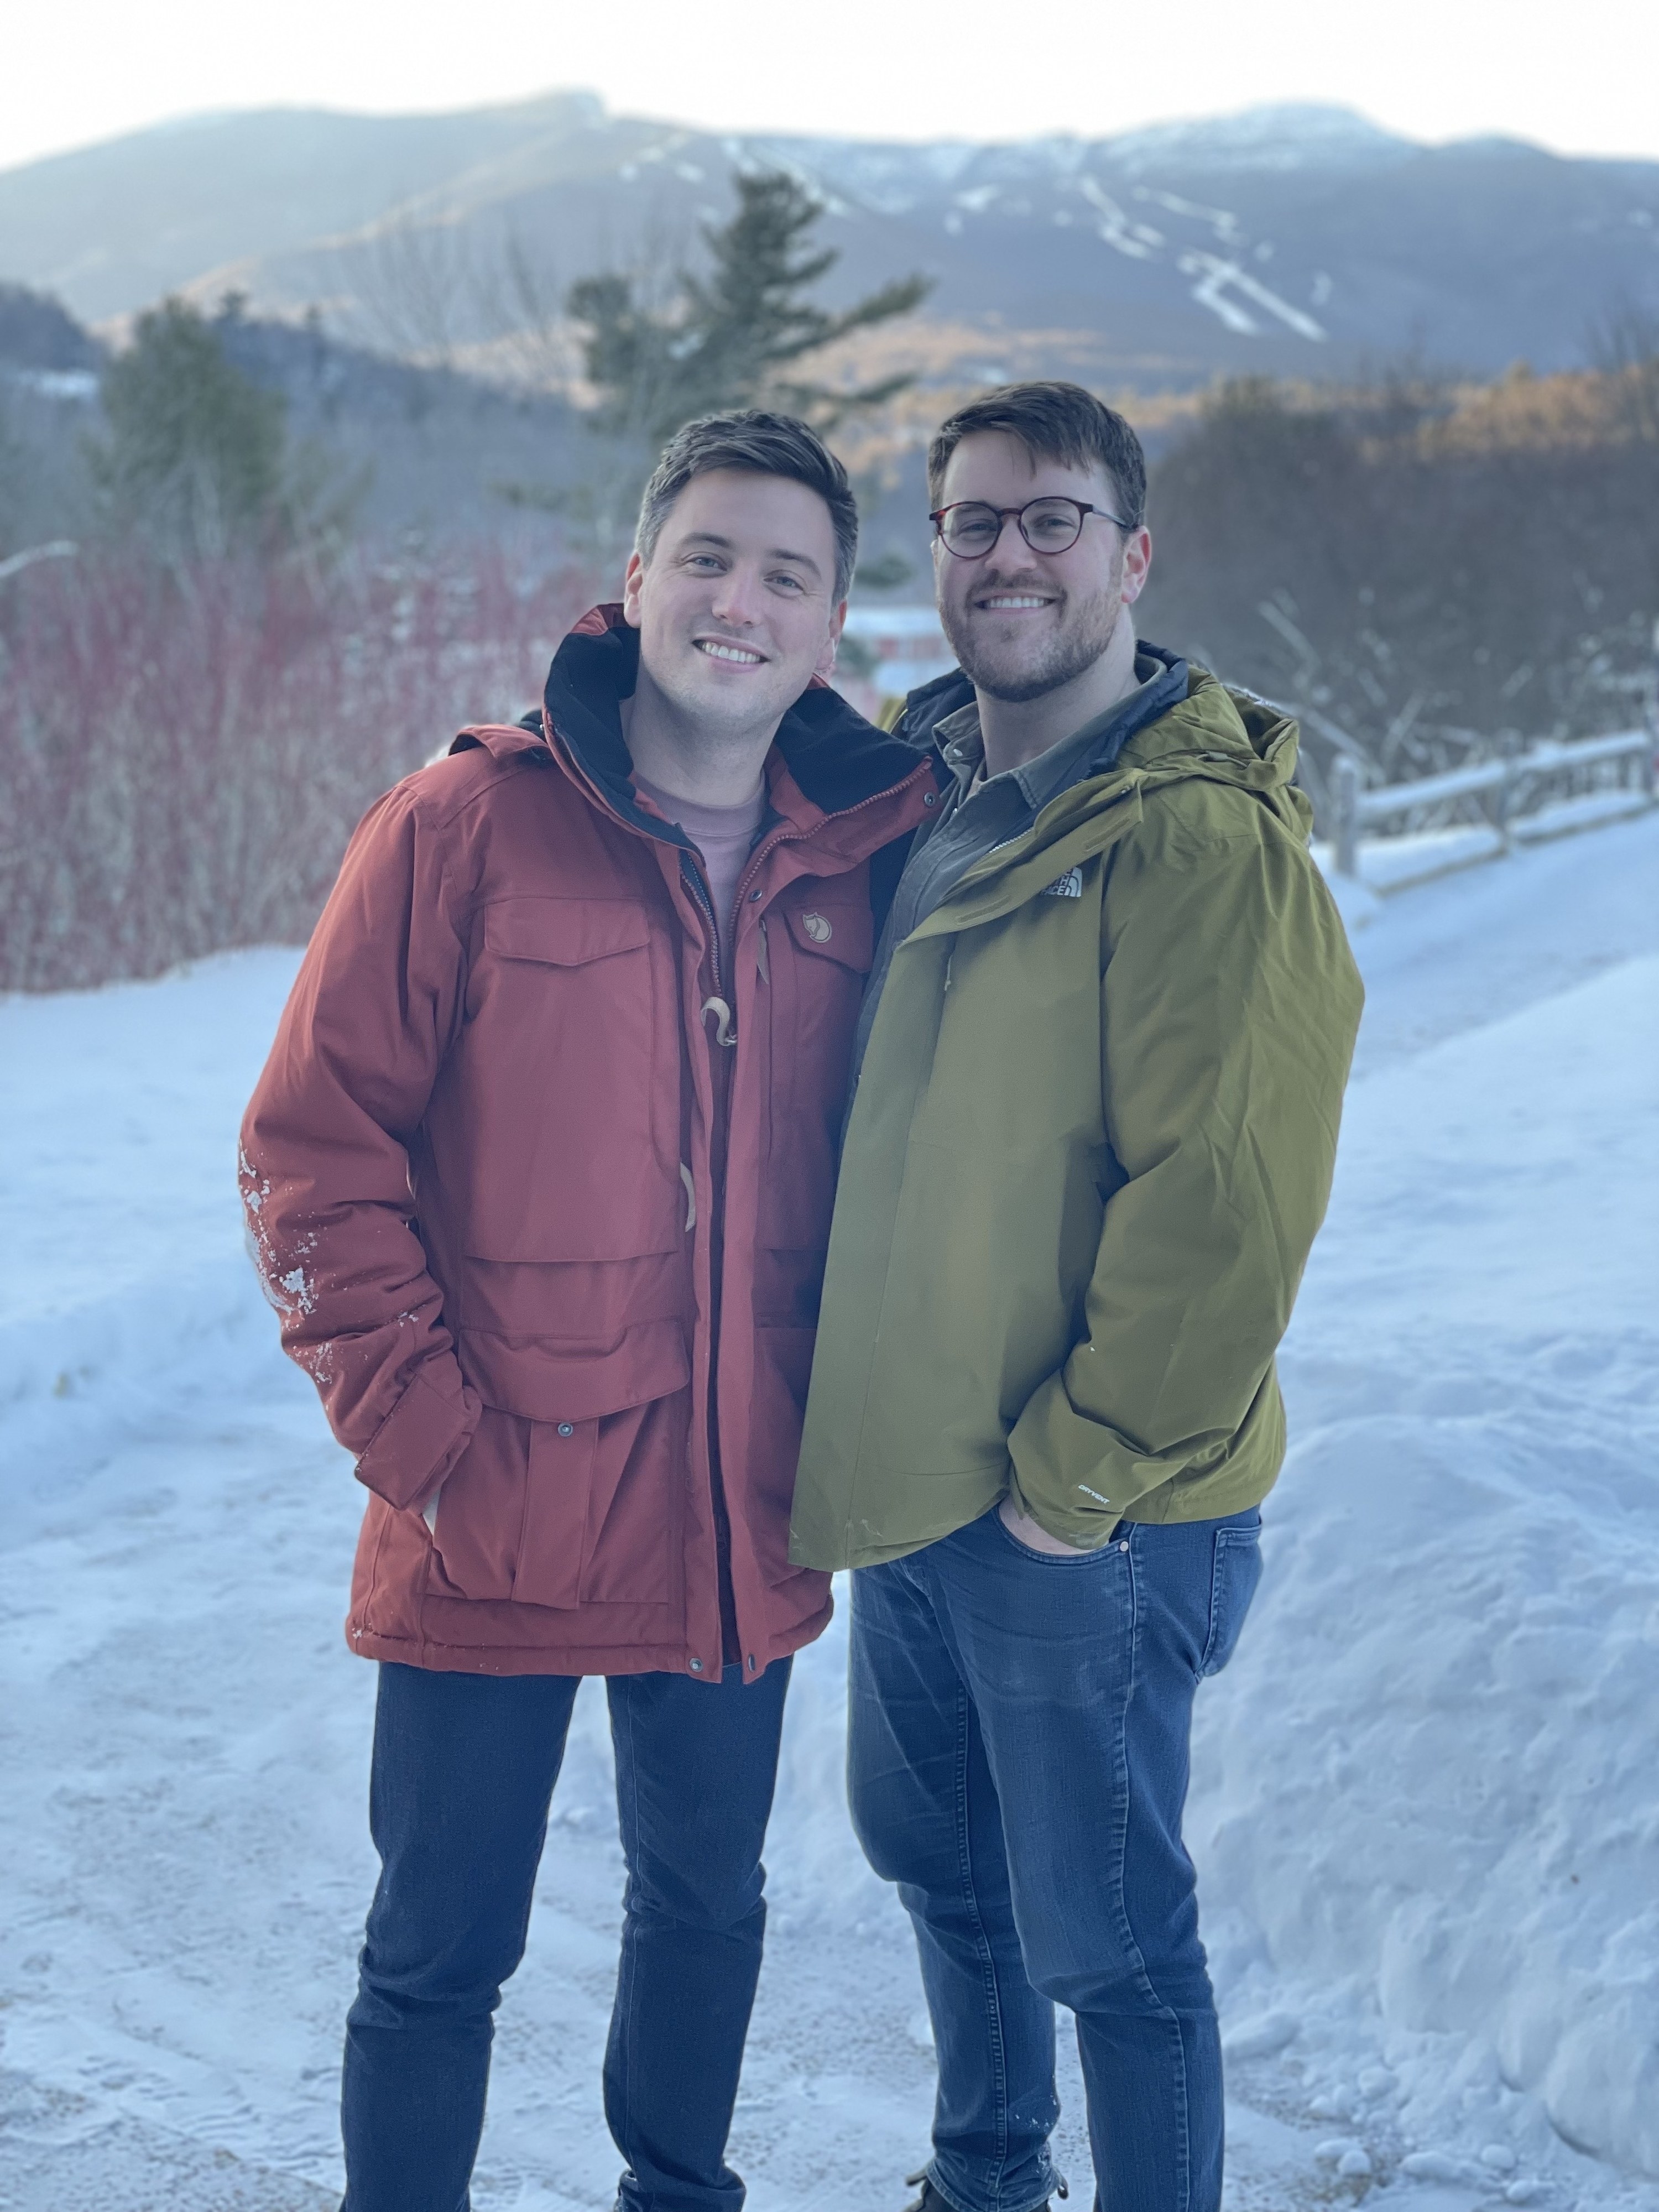 Two people wearing jeans and jackets stand together in a snowy setting